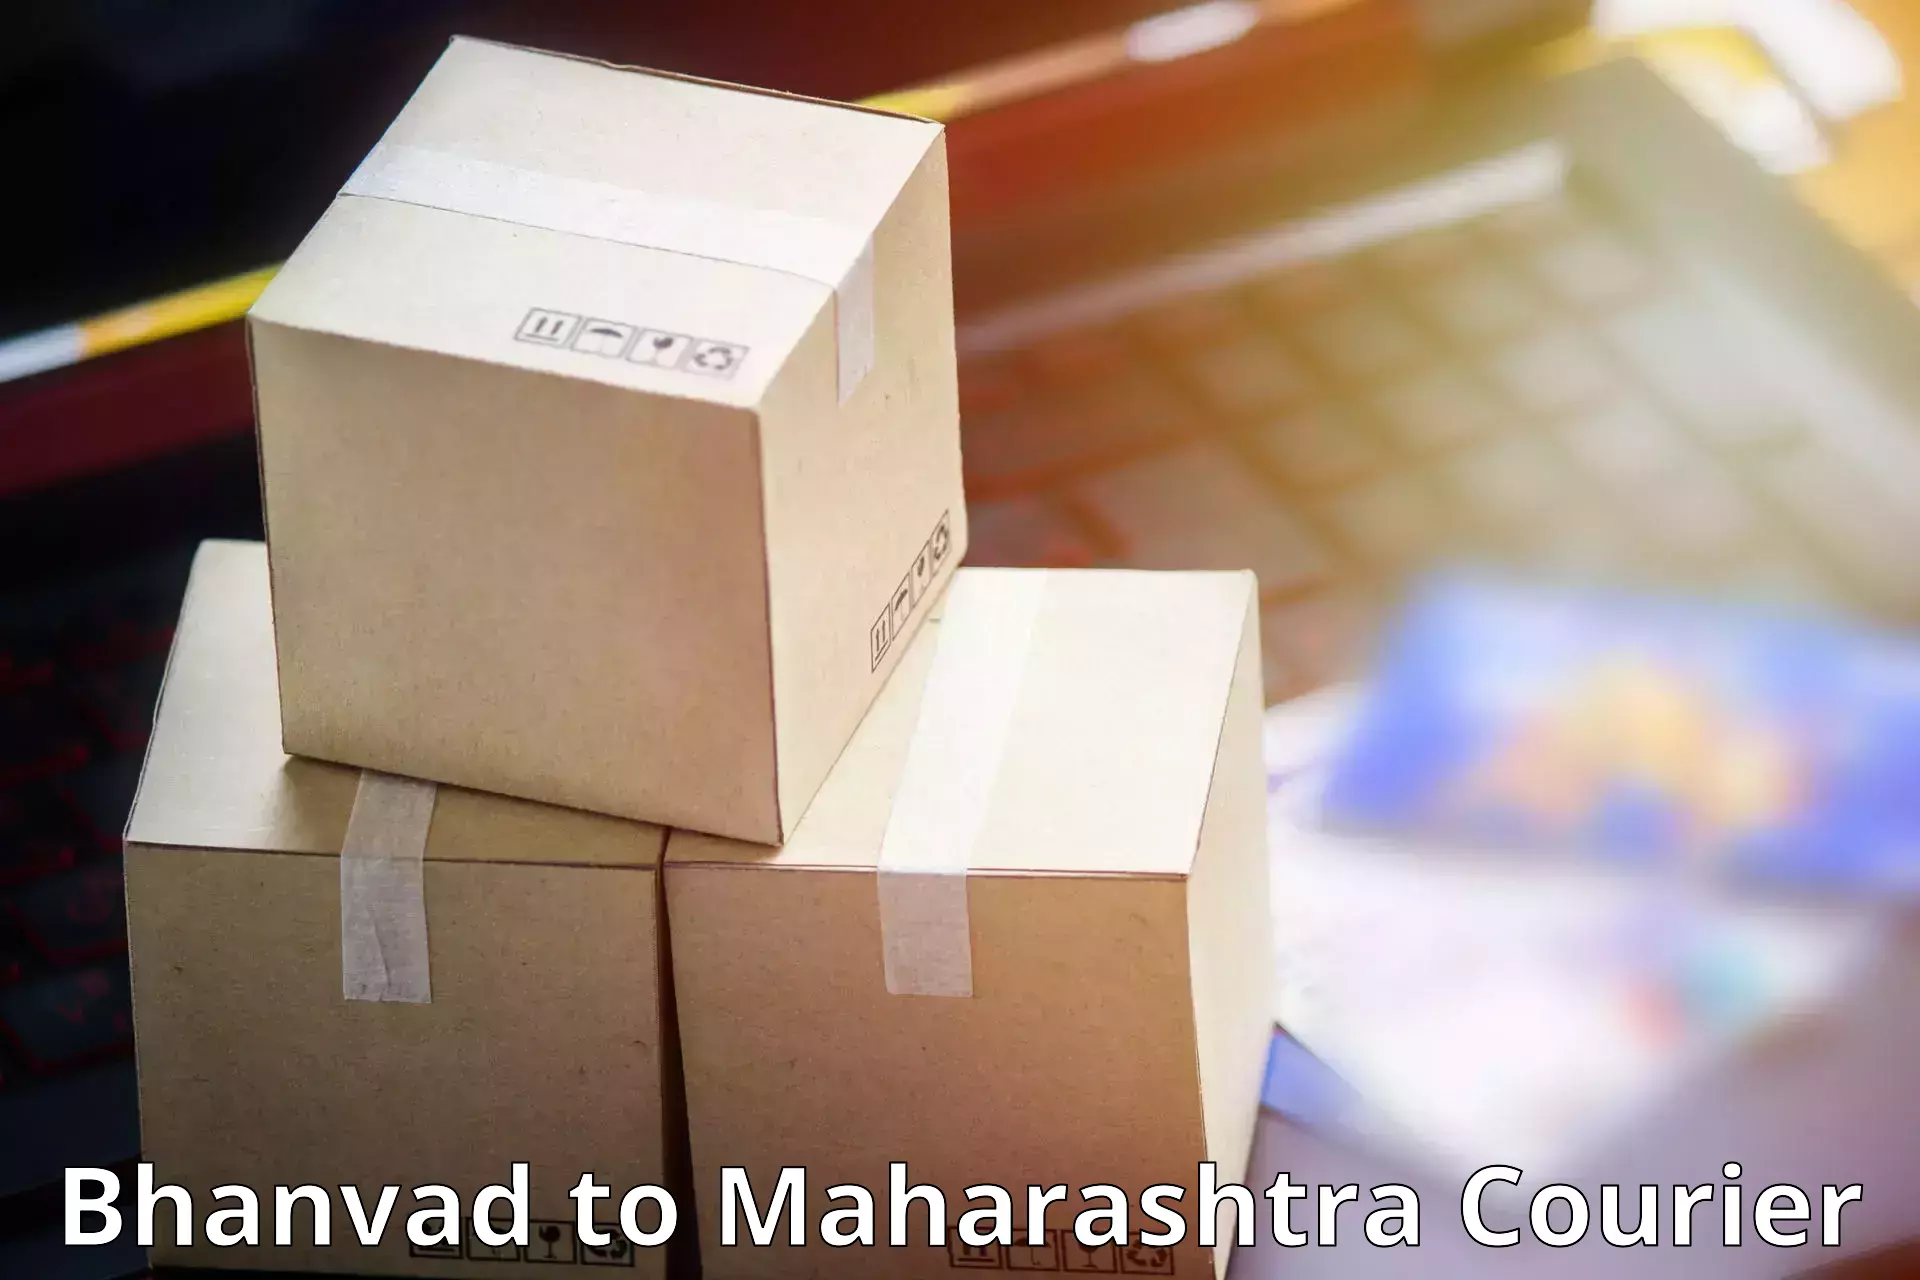 Parcel handling and care Bhanvad to Nagpur